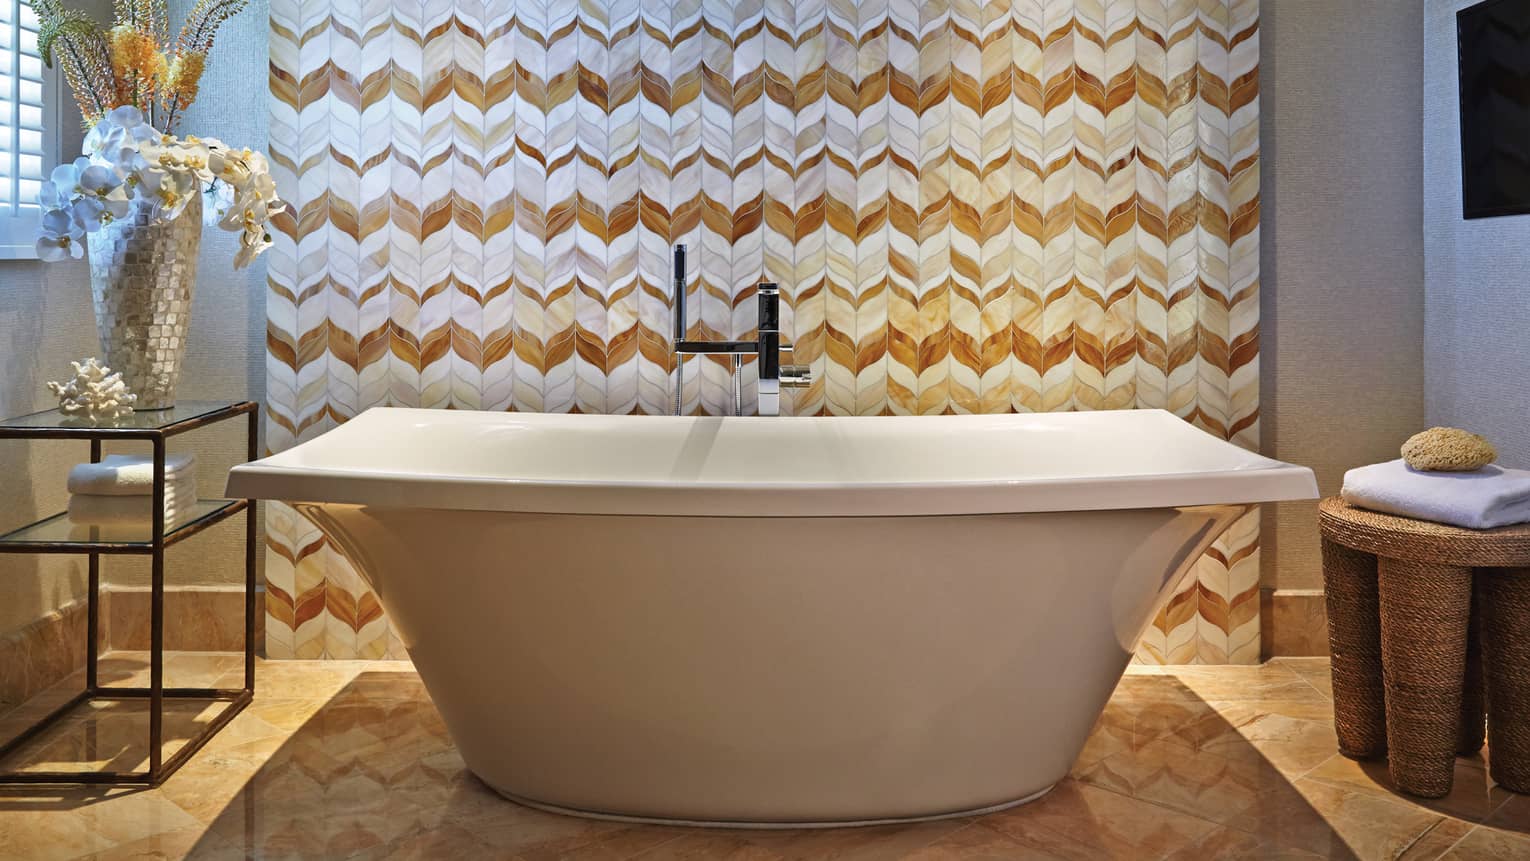 Maile Suite master bathroom with freestanding tub and patterned wall